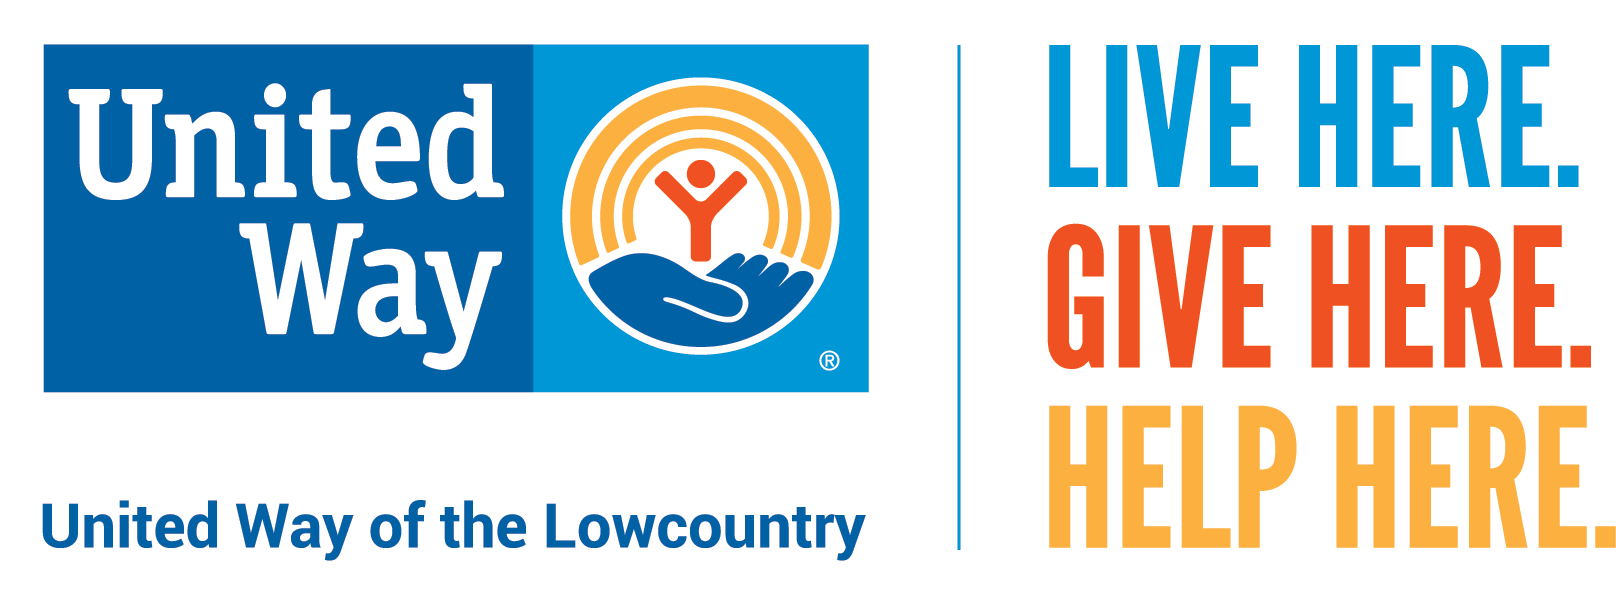 United Way of the Lowcountry logo